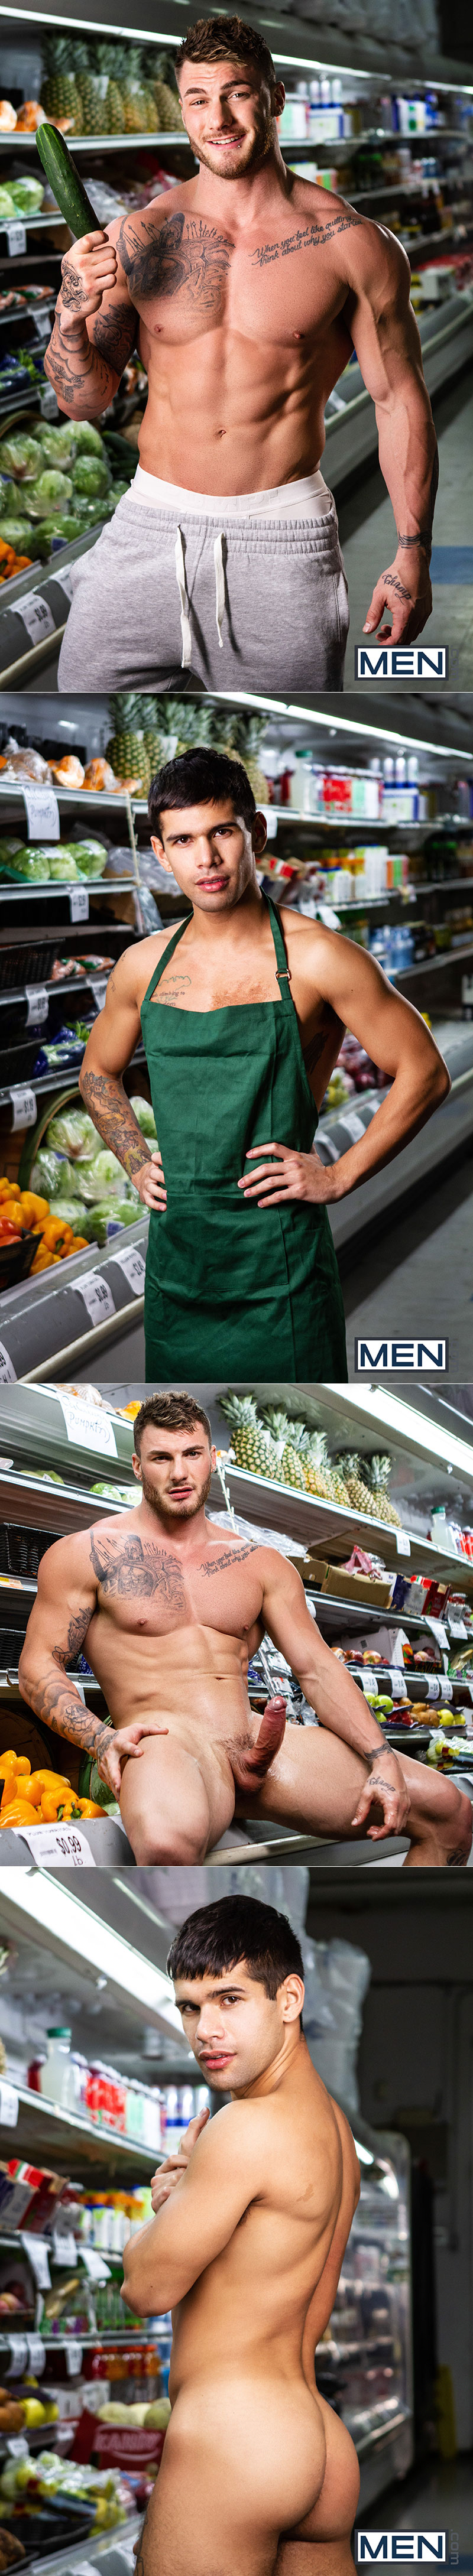 Men.com: William Seed bangs Ty Mitchell in "Clean‑Up on Aisle 69"